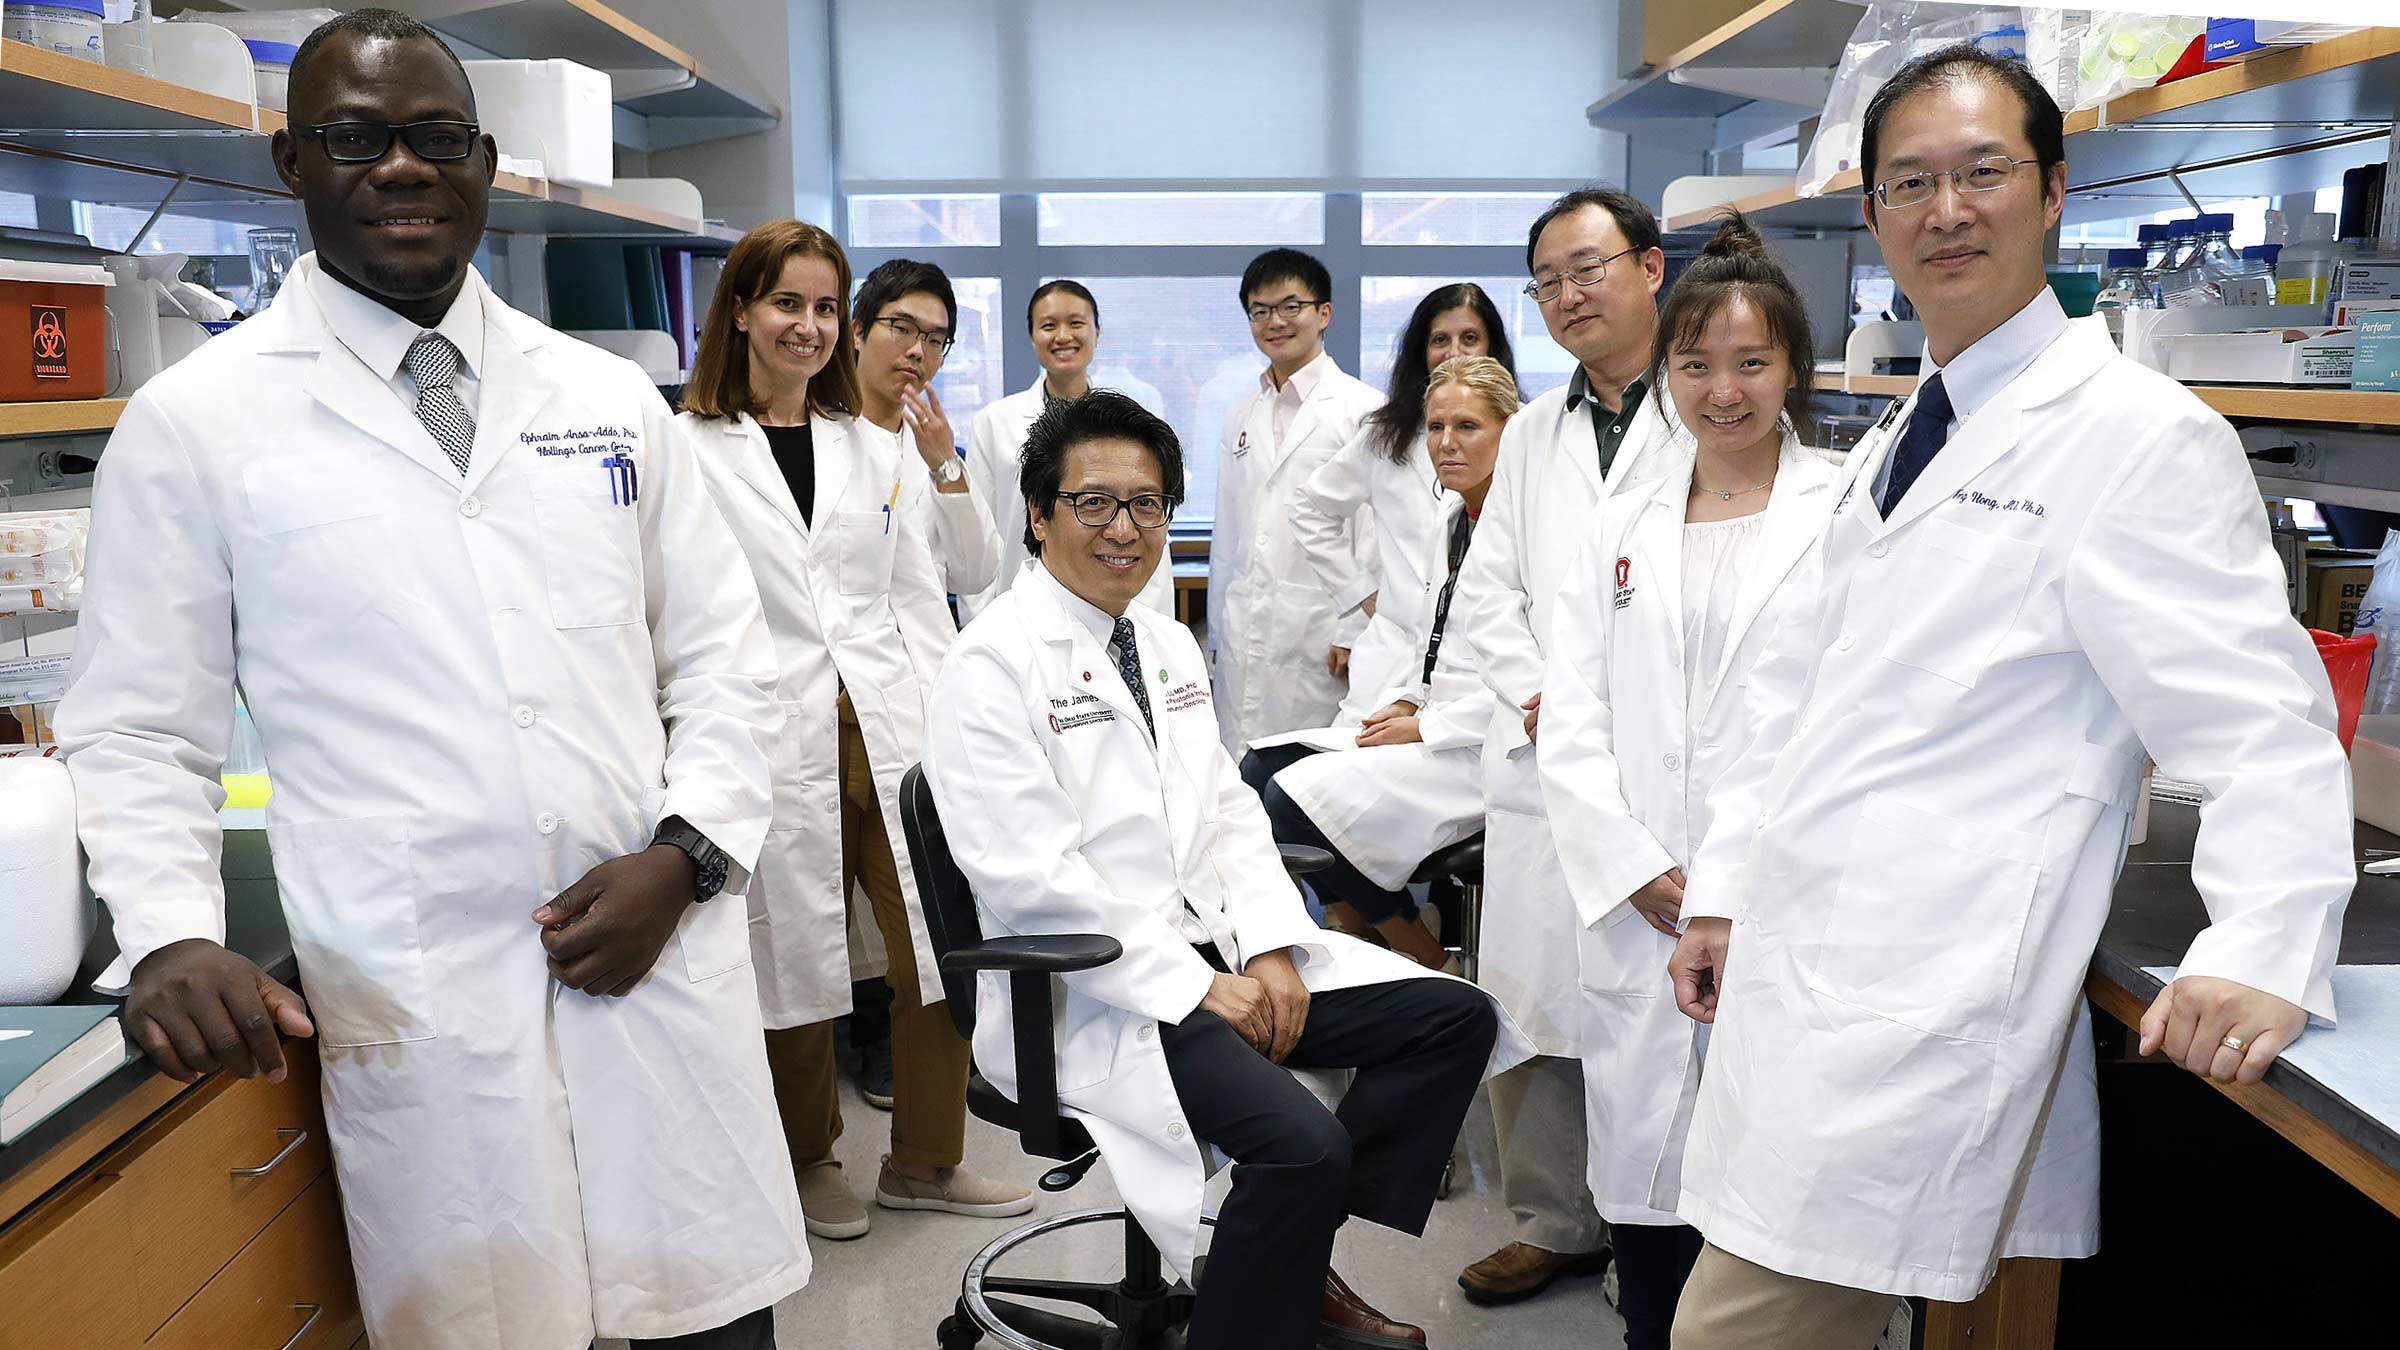 Zihai Li, MD PhD and a group of researchers in their lab Ohio State